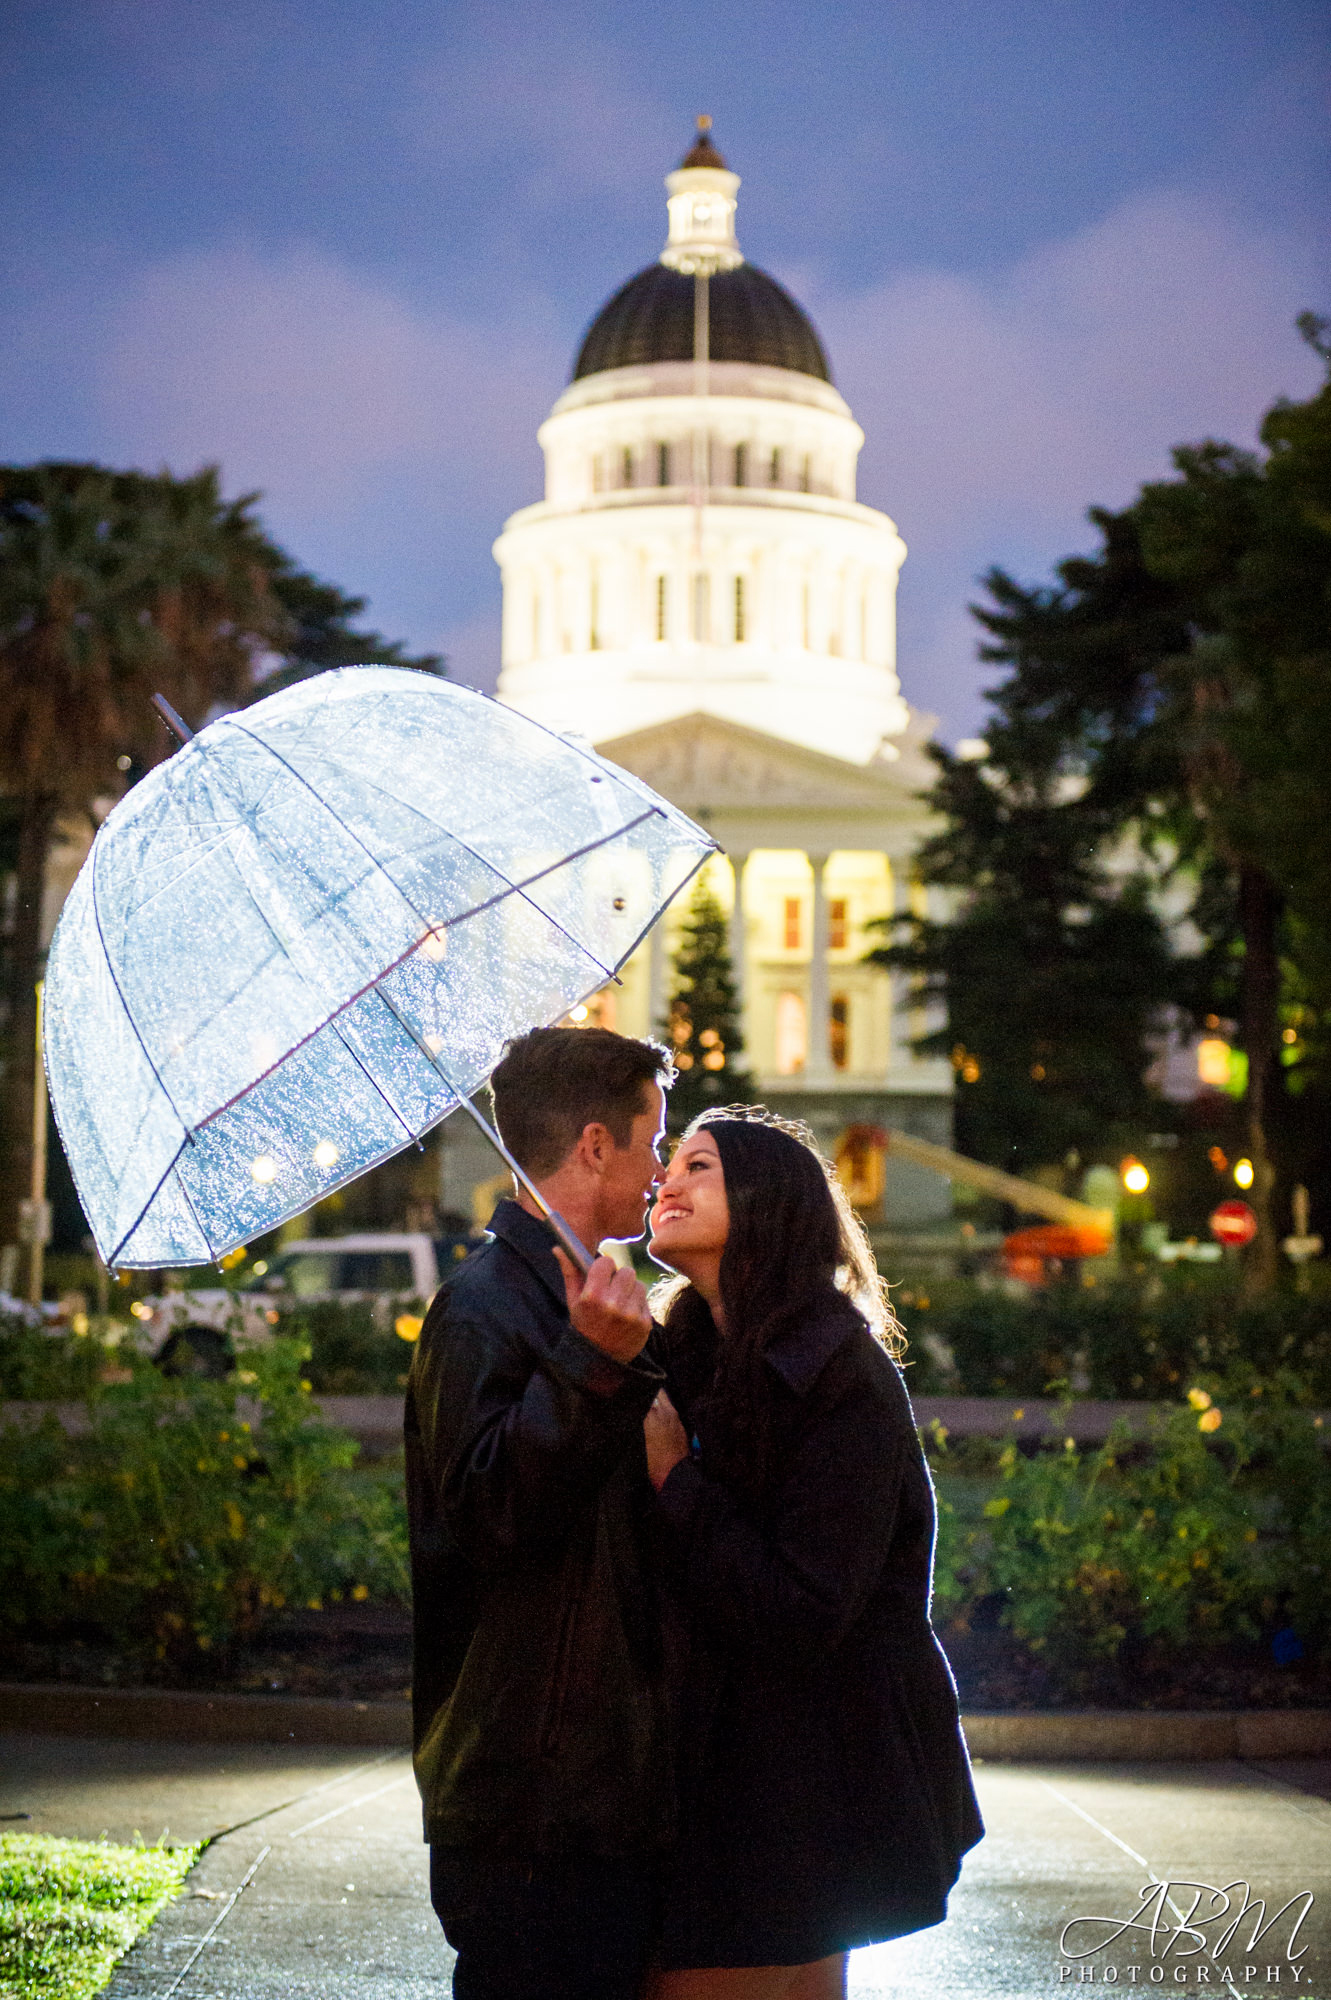 sacromento-fire-station-engagement-san-diego-wedding-photography-0003-1 Fire Station 5 | State Capital | Sacramento | Chalyn + Jen’s Engagement Photography